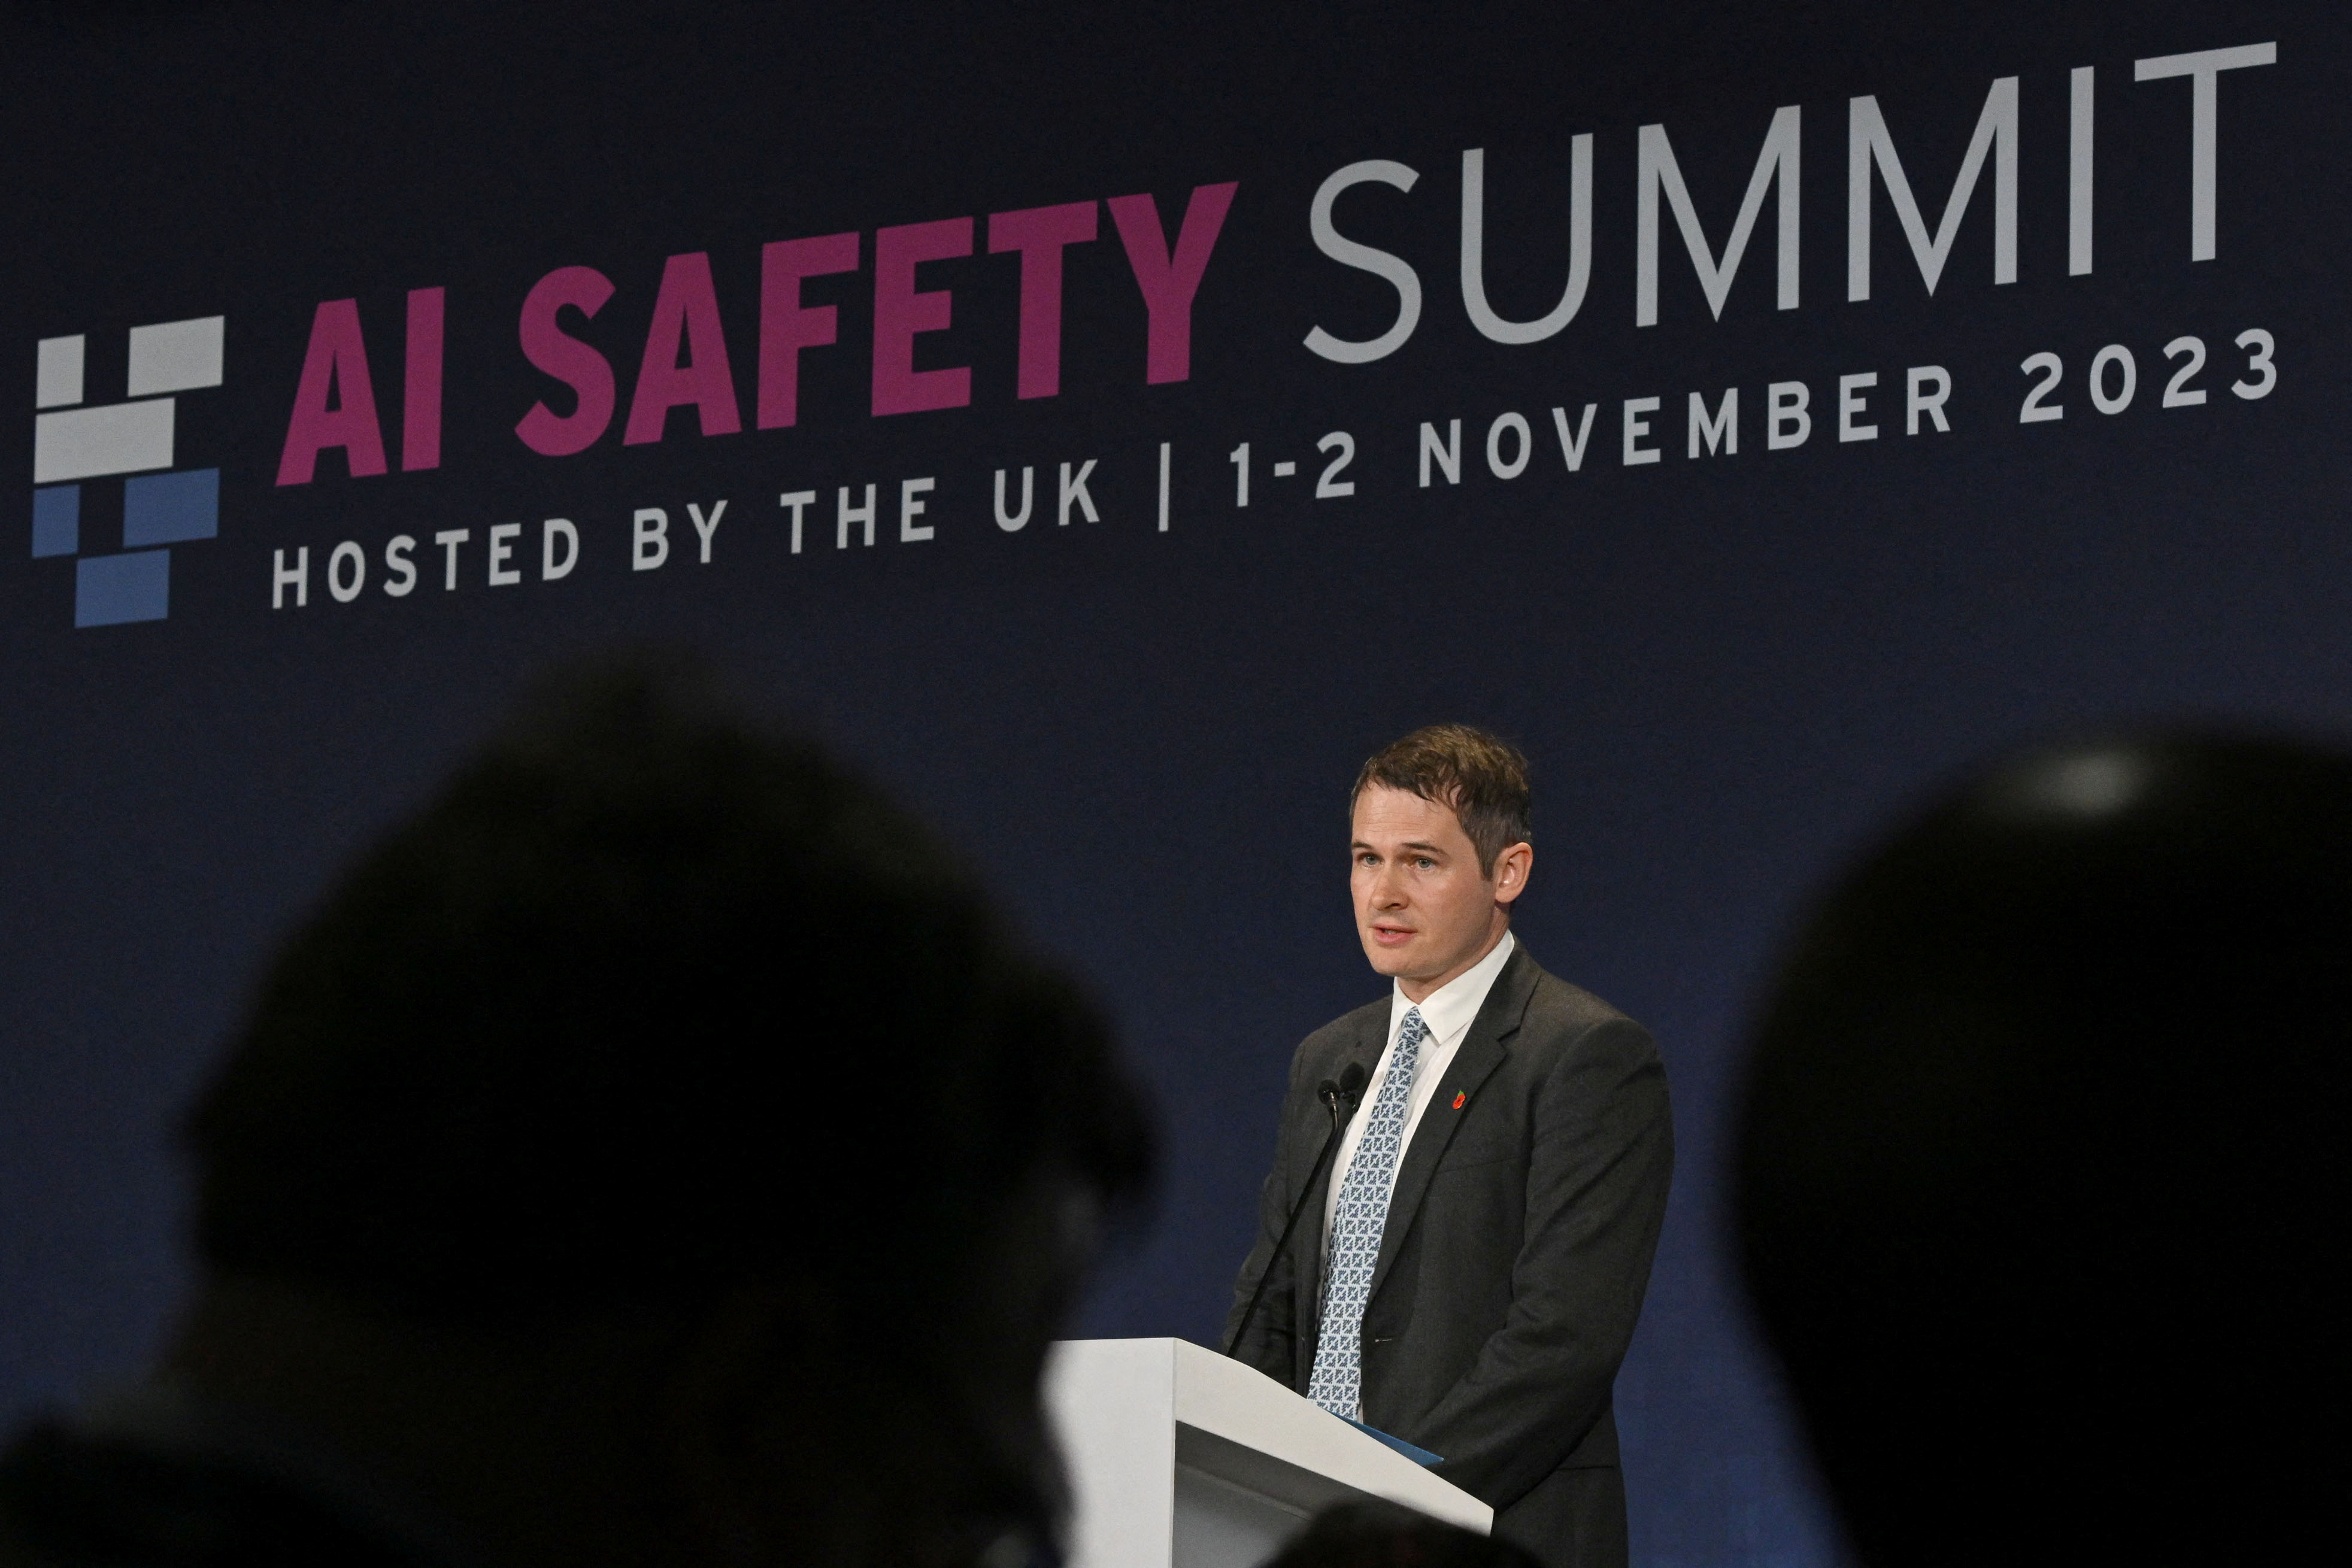 AI Safety Summit in Bletchley